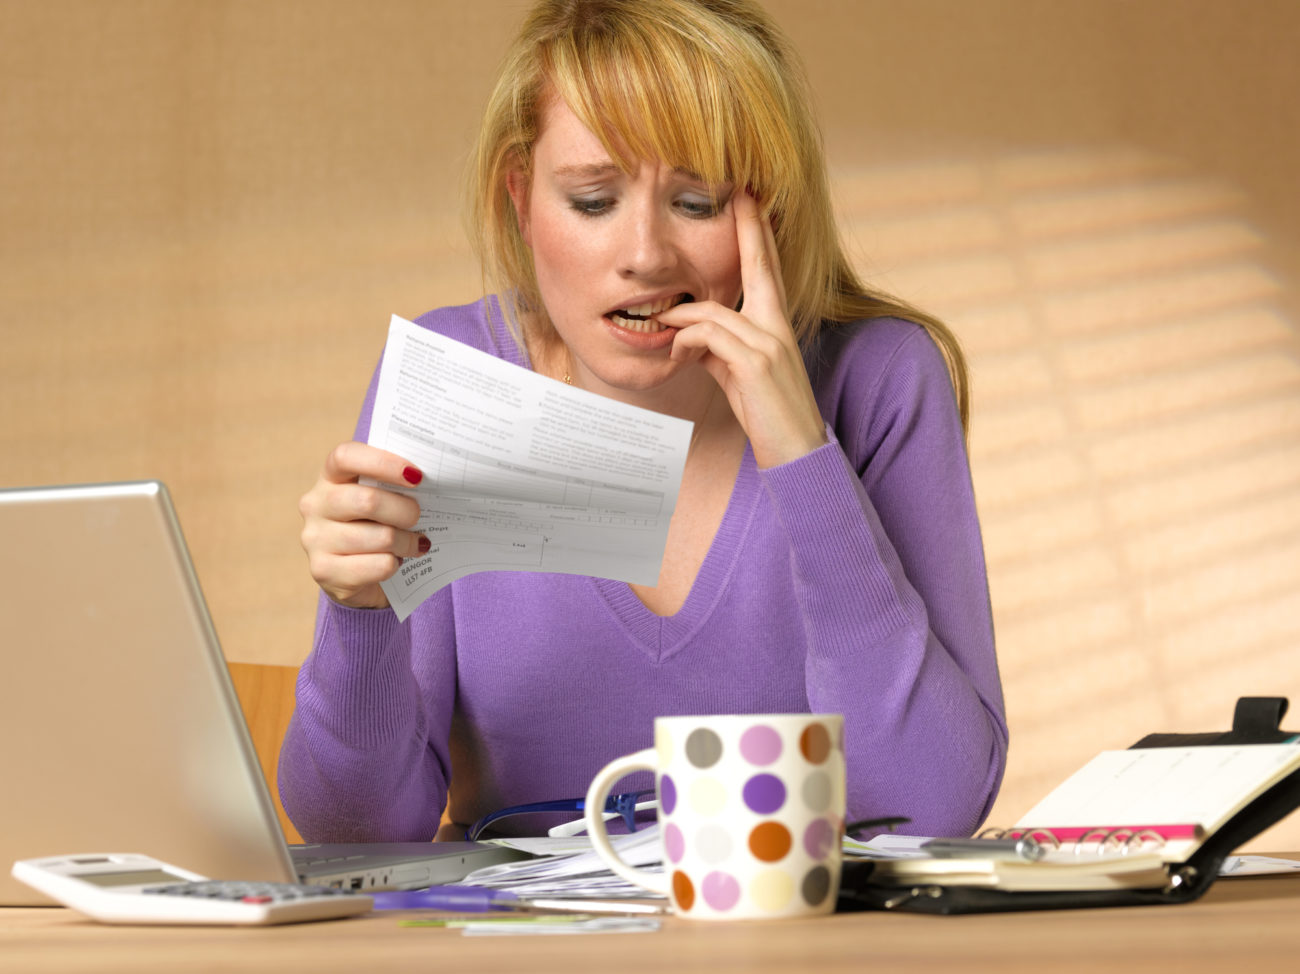 A stressed out woman is sitting in front of her computer and looking at a bill while she tries debt management